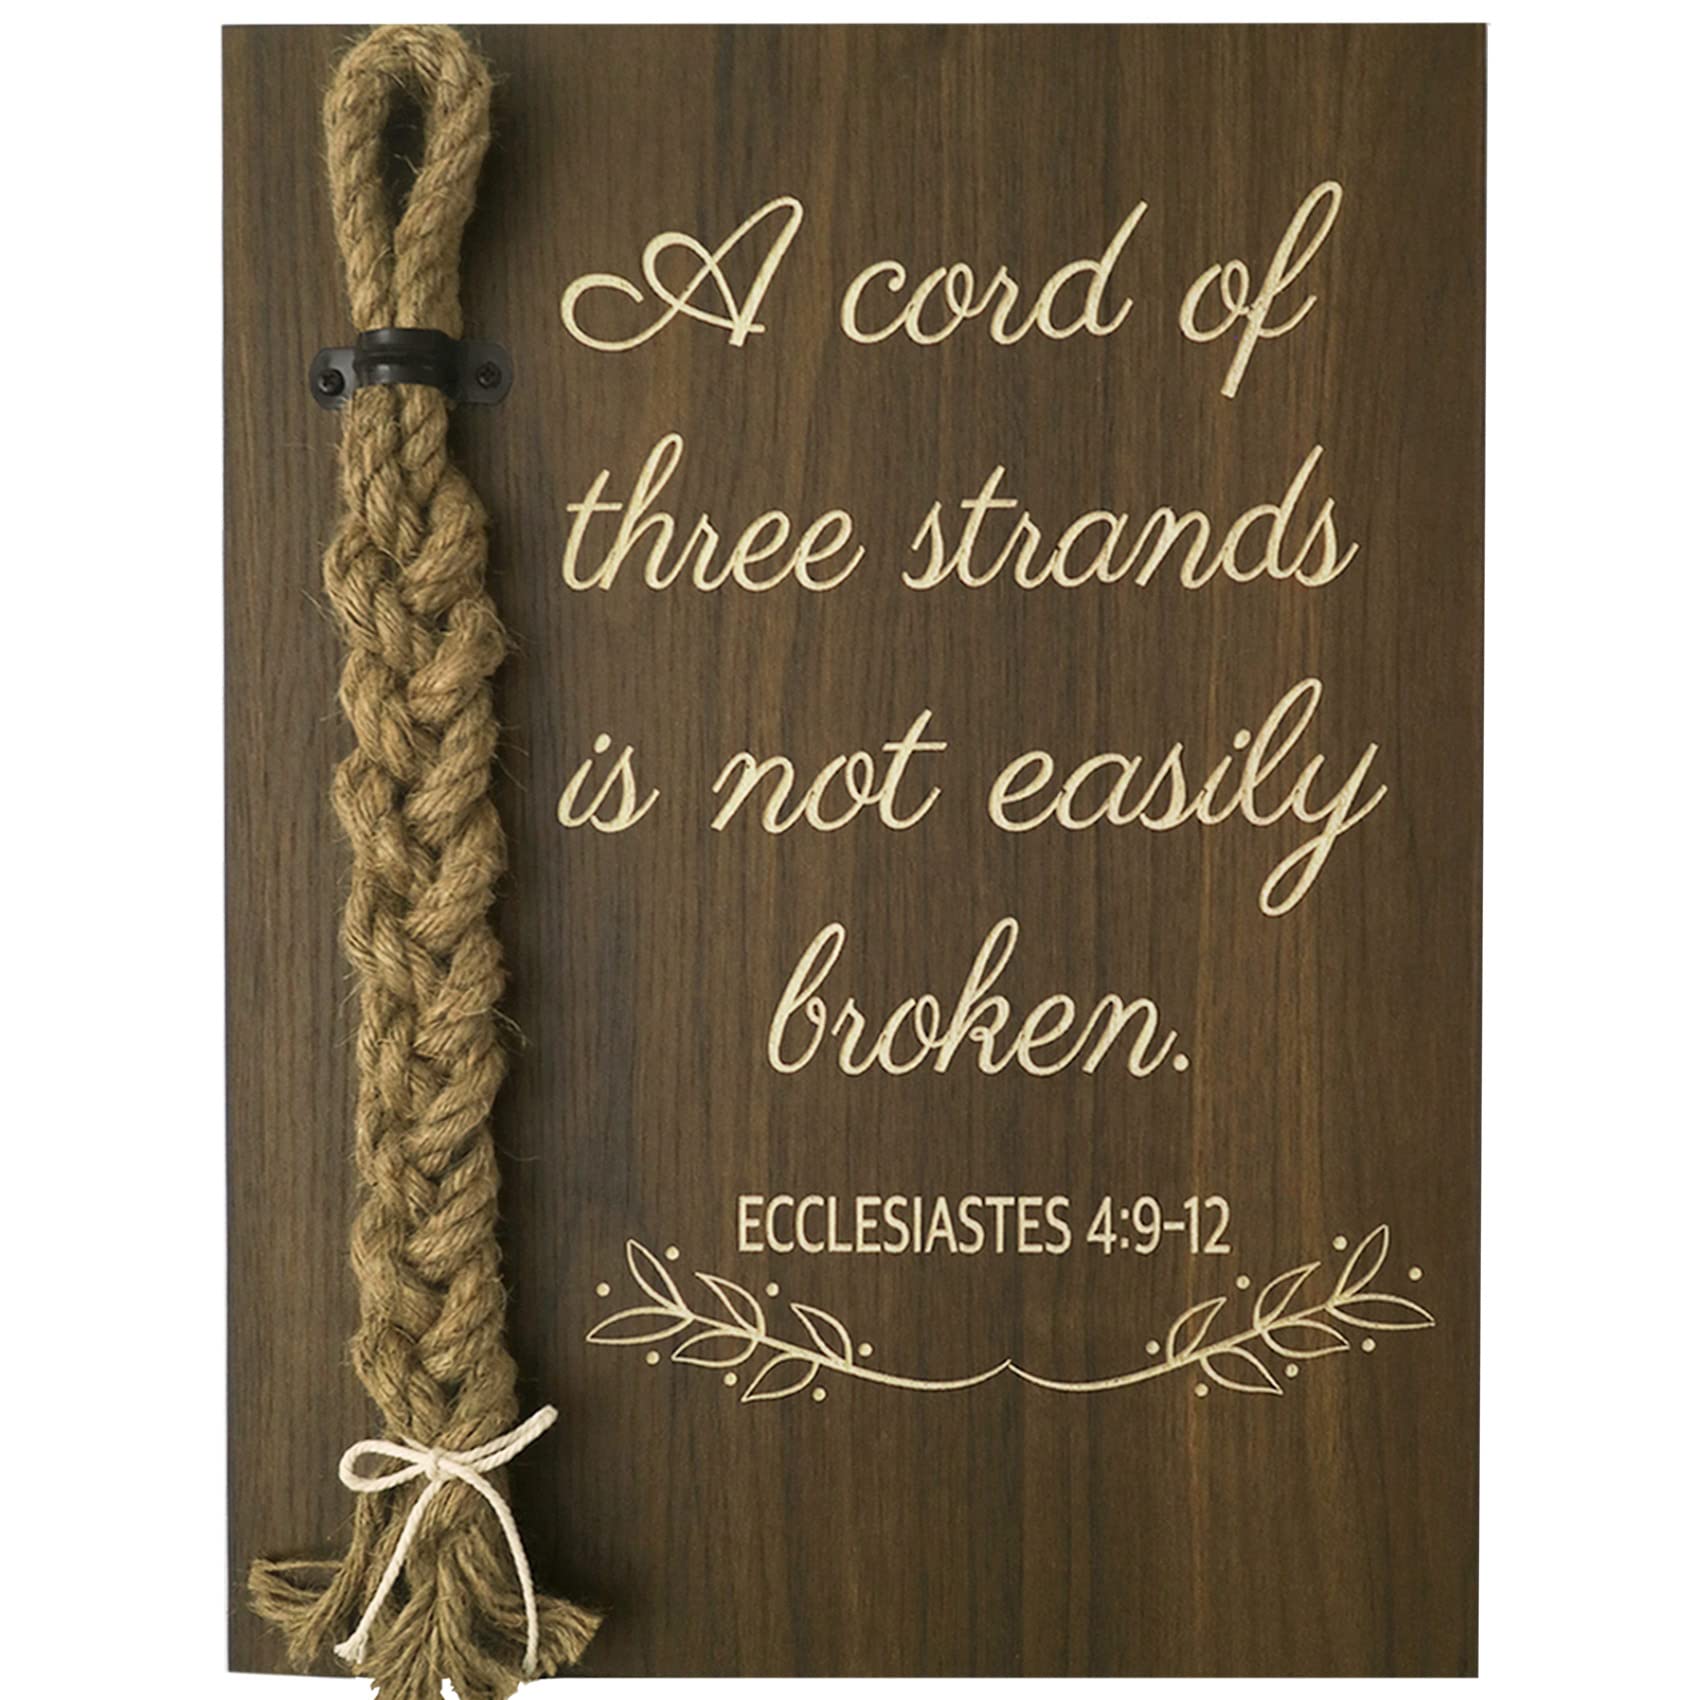 A Cord of Three Strands Wedding Sign, Bible Cross Wedding Unity Sign, Tie The Knot Ceremony - Strand of Three Cords Sign Ecclesiastes 4:9-12